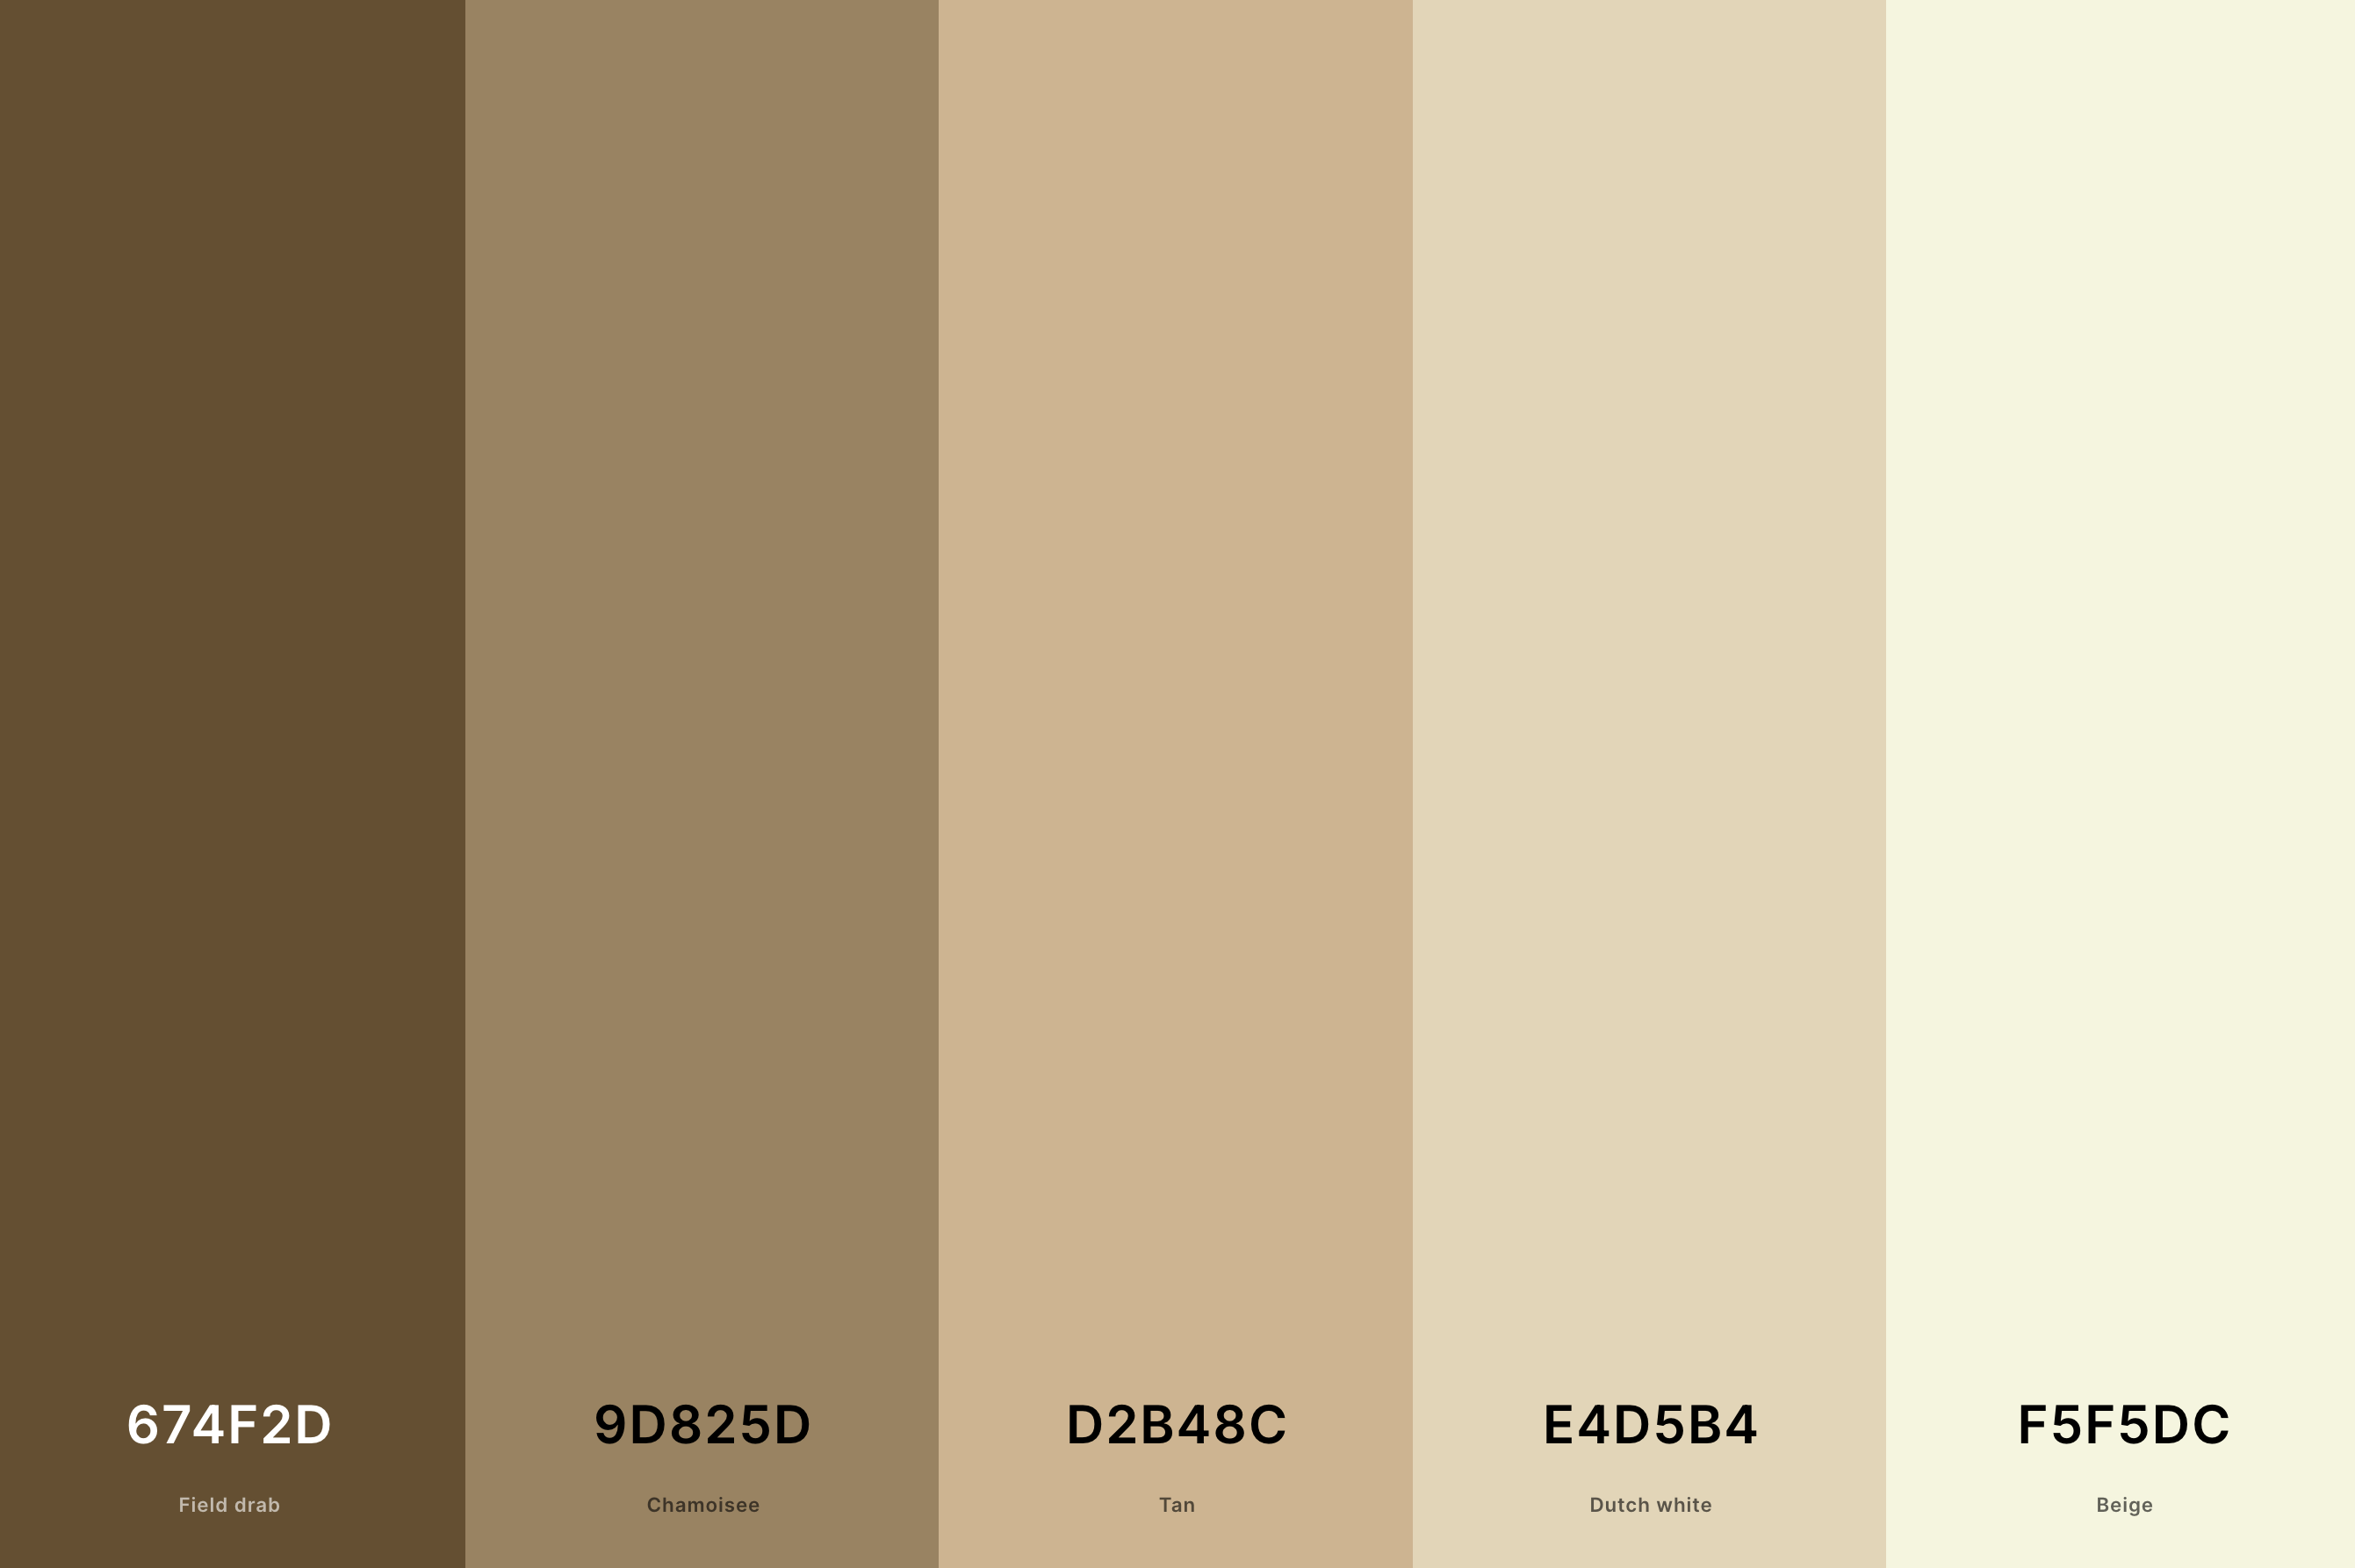 17. Beige And Tan Color Palette Color Palette with Field Drab (Hex #674F2D) + Chamoisee (Hex #9D825D) + Tan (Hex #D2B48C) + Dutch White (Hex #E4D5B4) + Beige (Hex #F5F5DC) Color Palette with Hex Codes